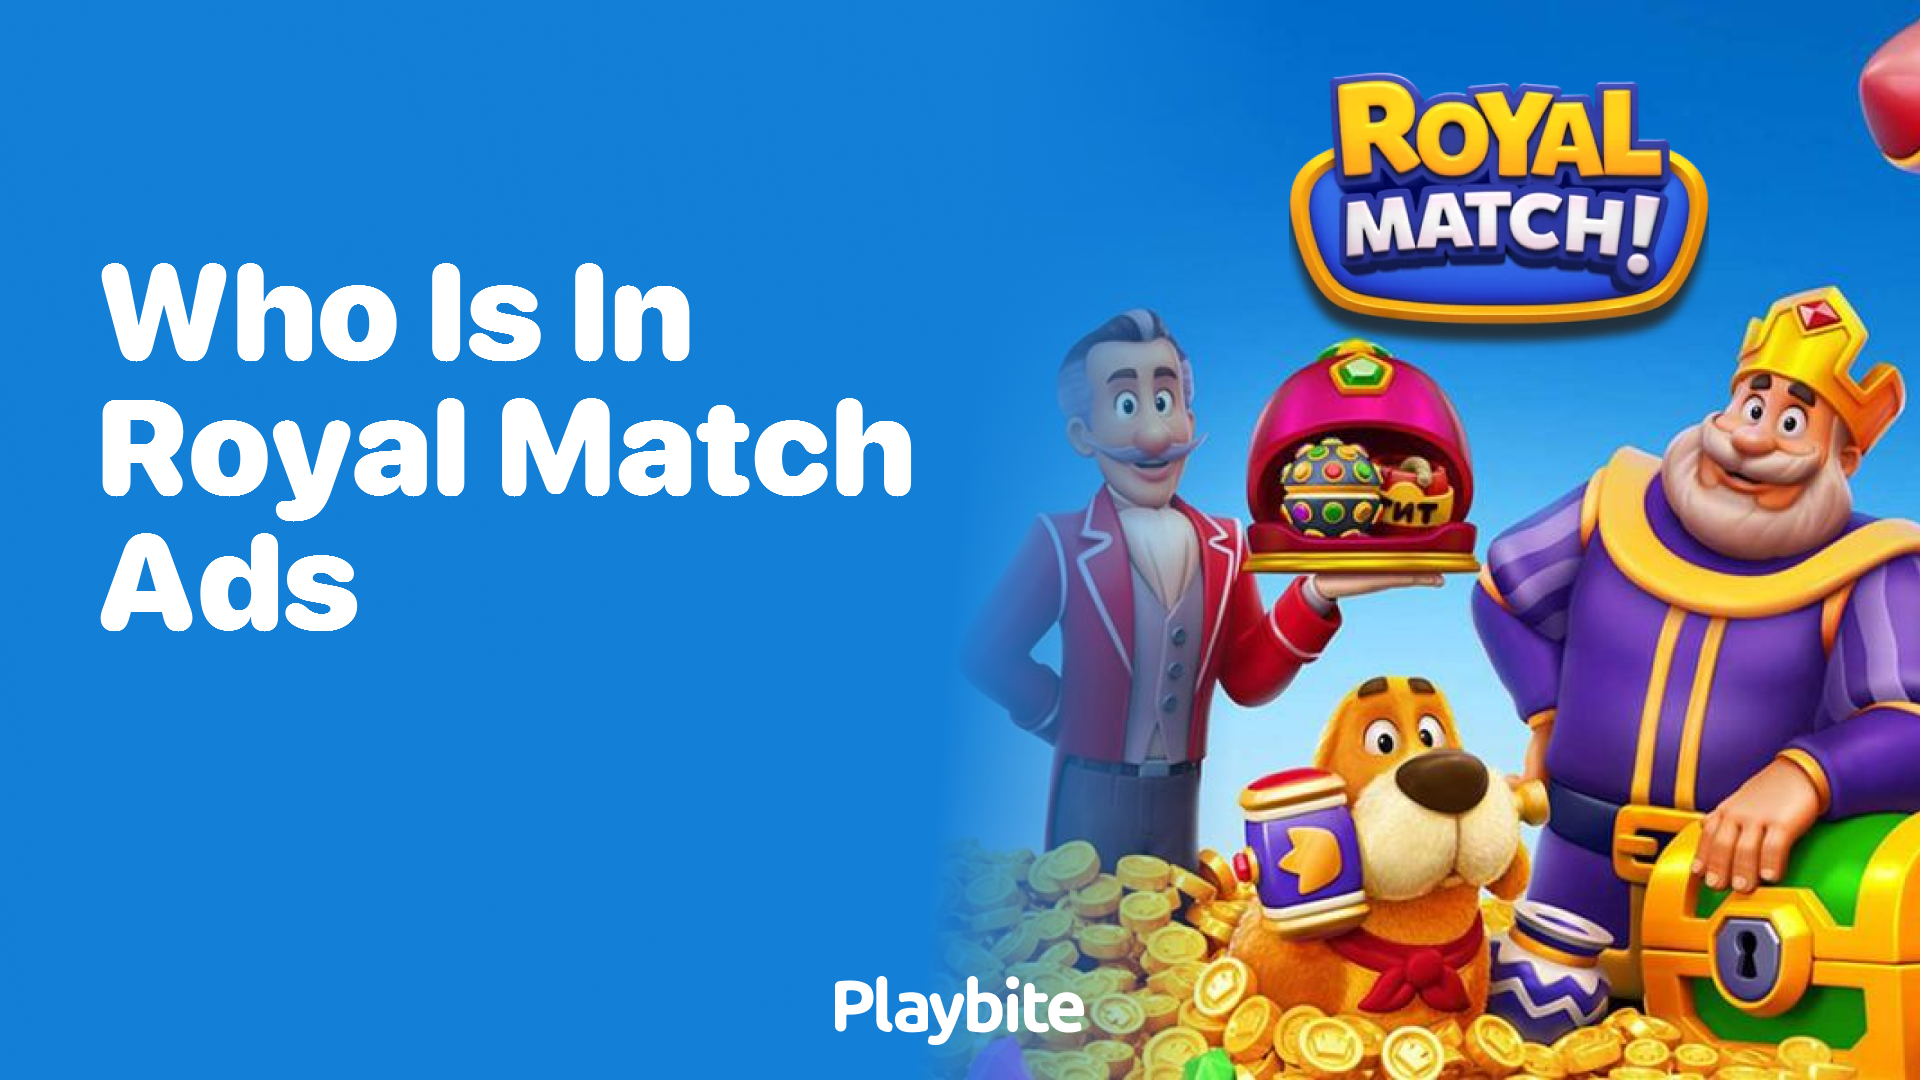 Who Is in Royal Match Ads?